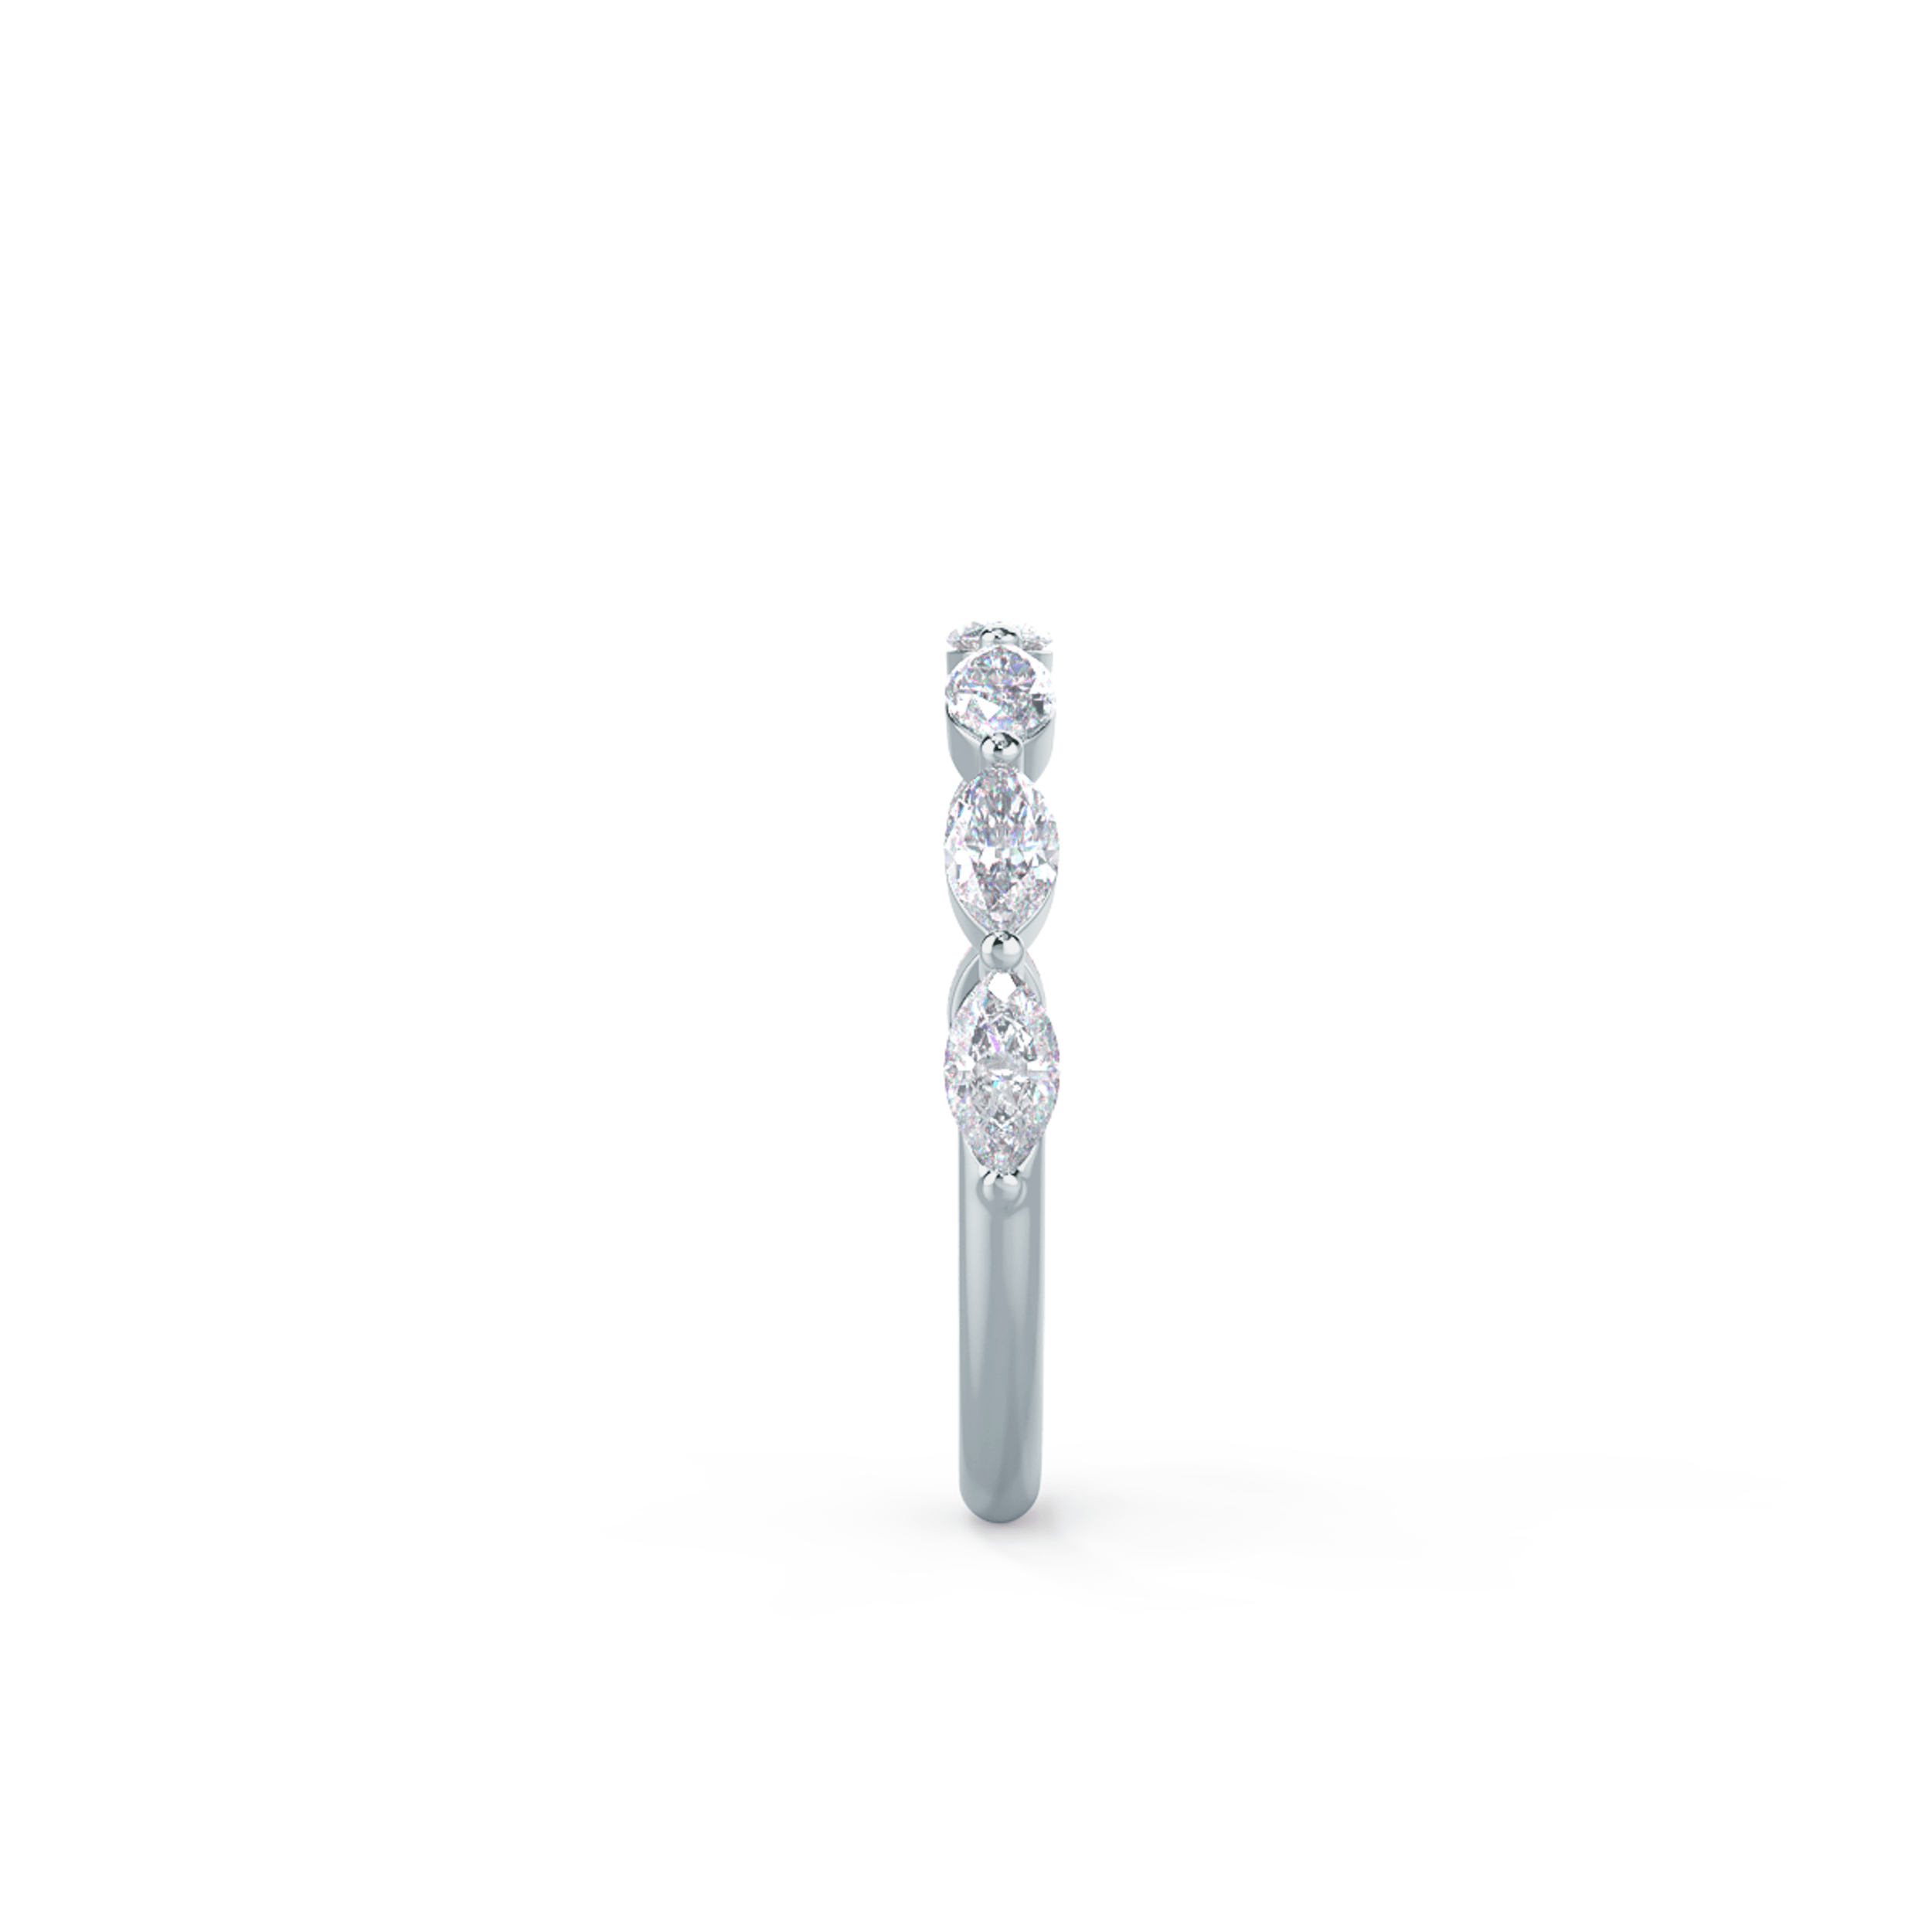 Hand Selected 0.7 ct Diamonds set in 18kt White Gold Marquise East-West Half Band (Side View)